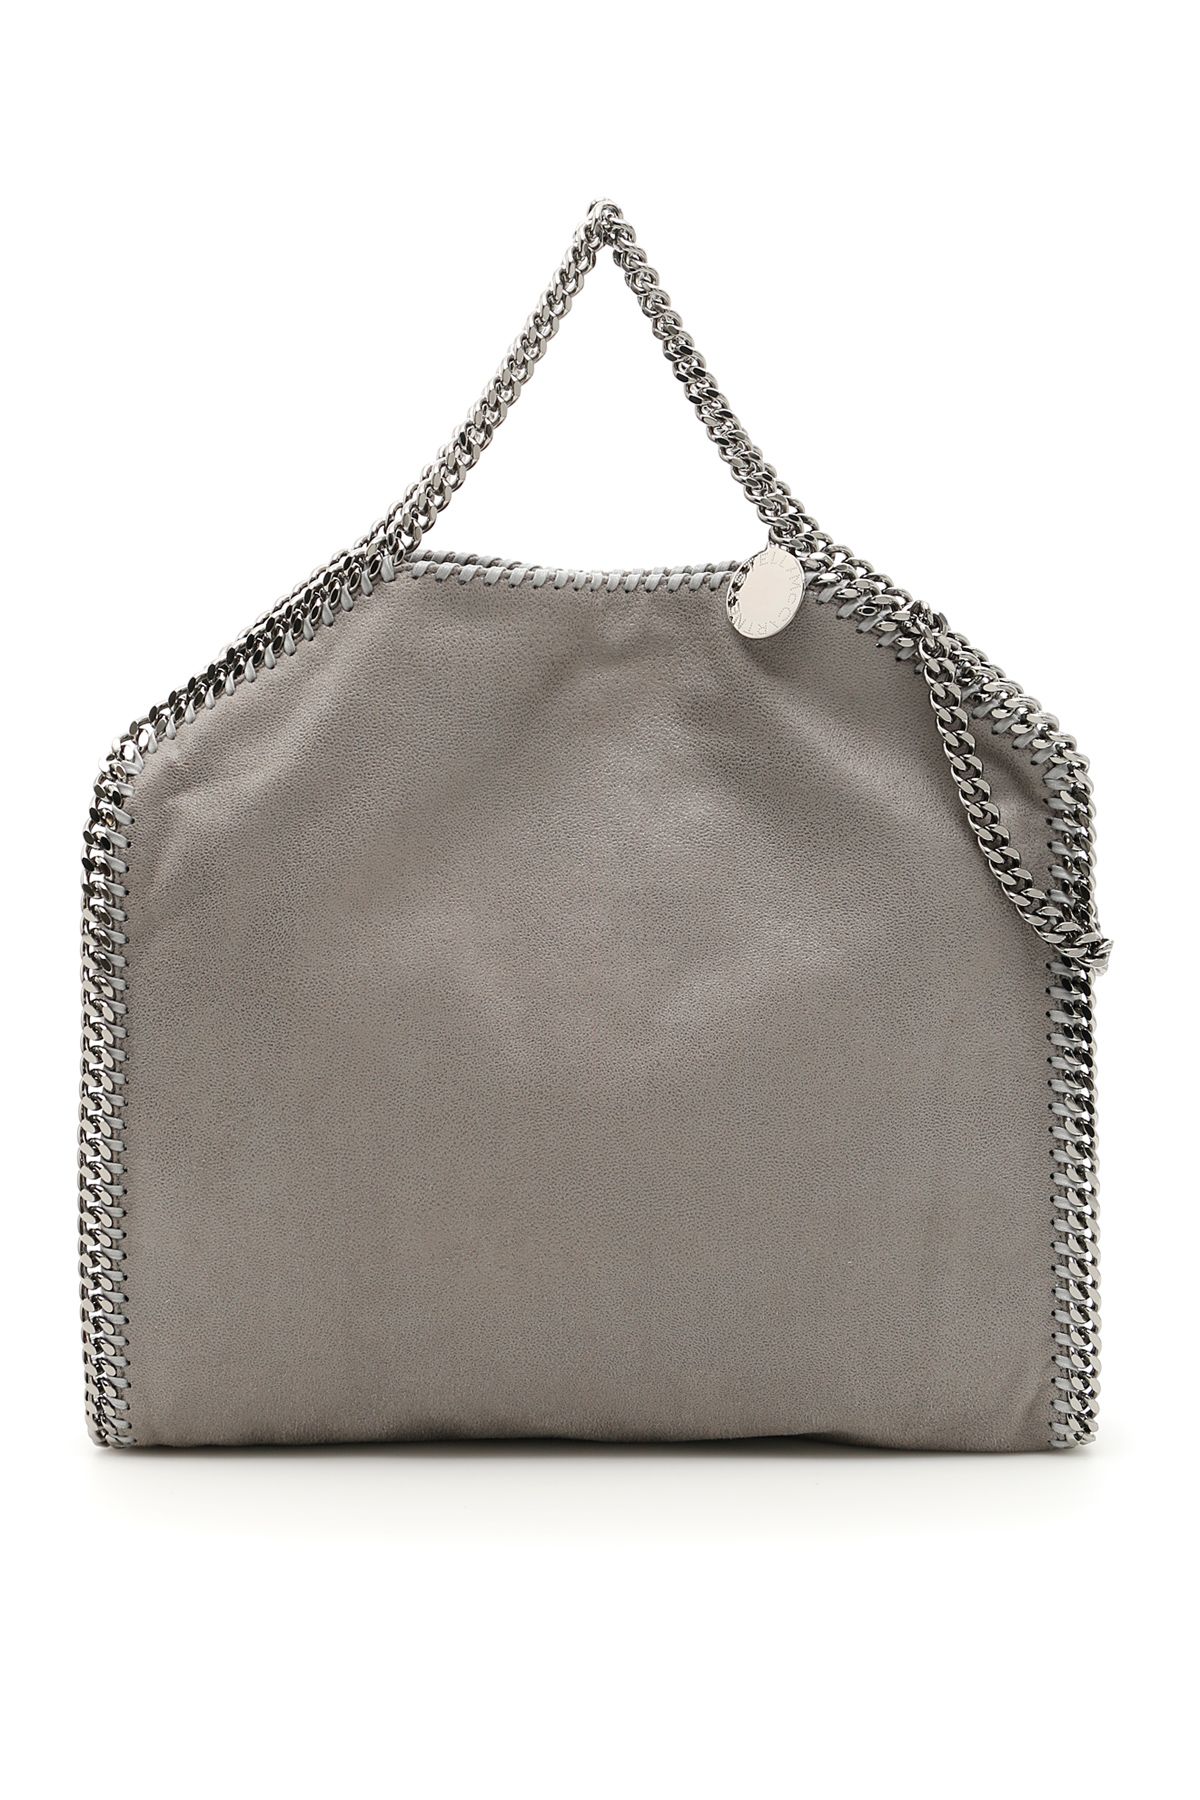 Stella McCartney - 3 Chain Falabella Tote Bag | ABOUT ICONS